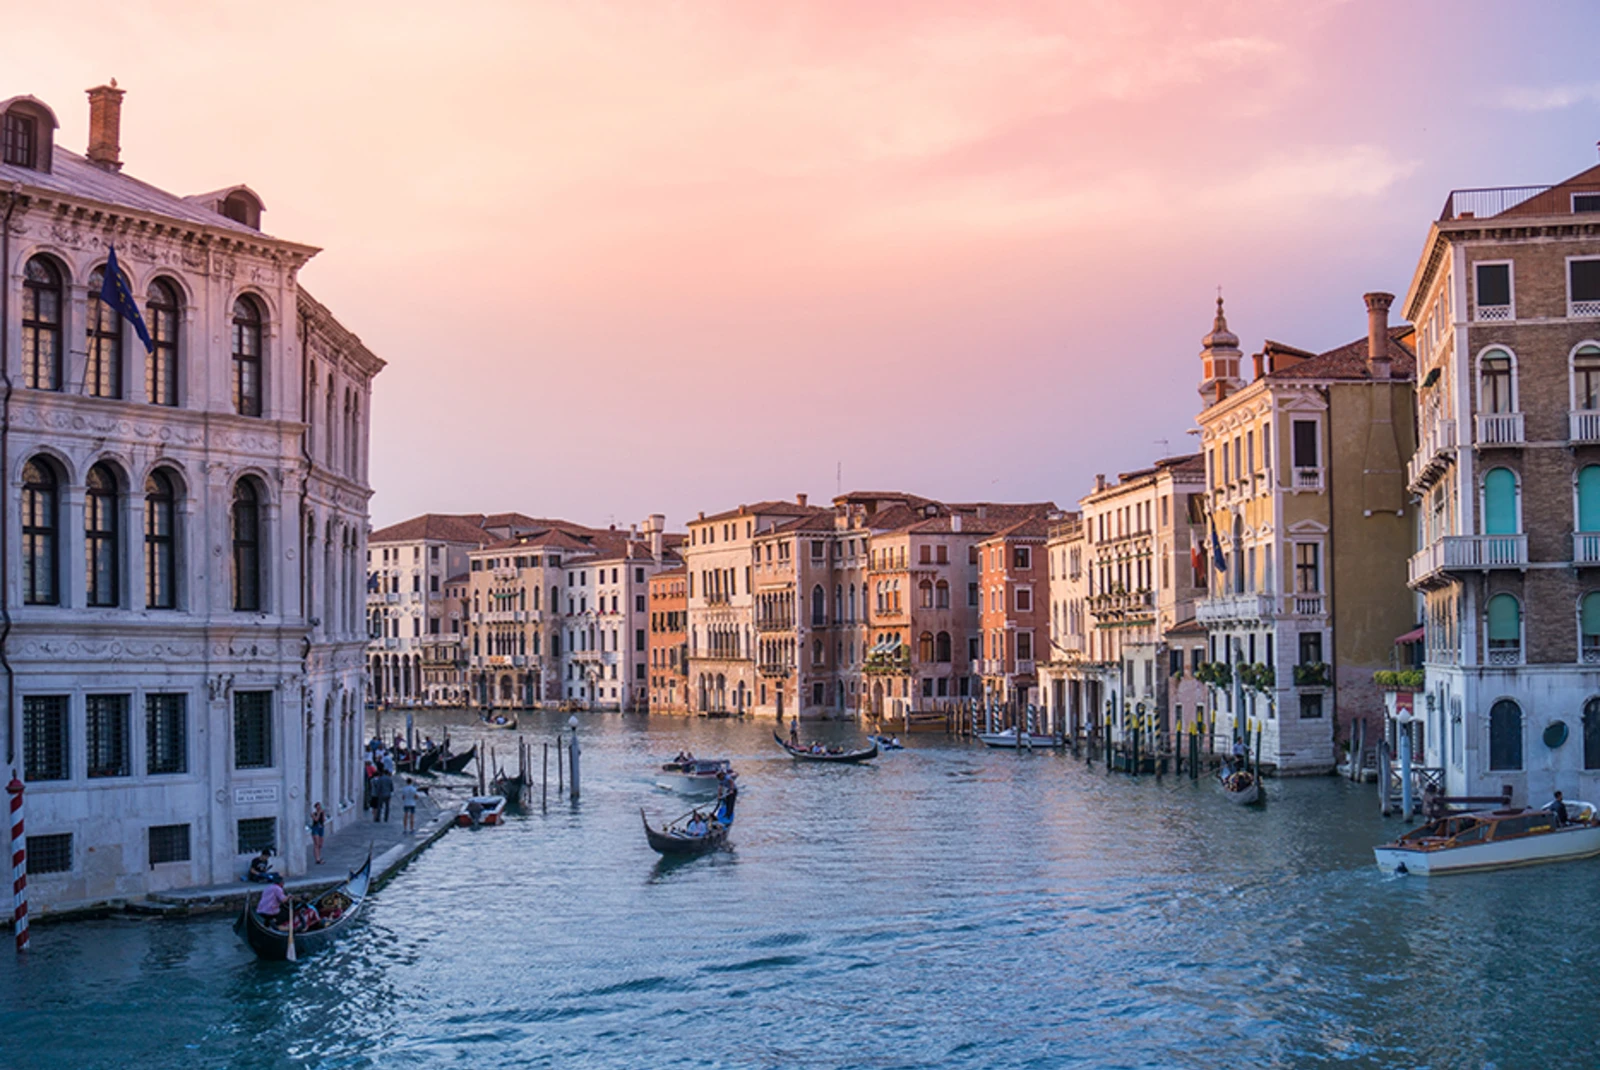 Family Trip to Italy: A 10-Day Itinerary - Day 5-6: Venice